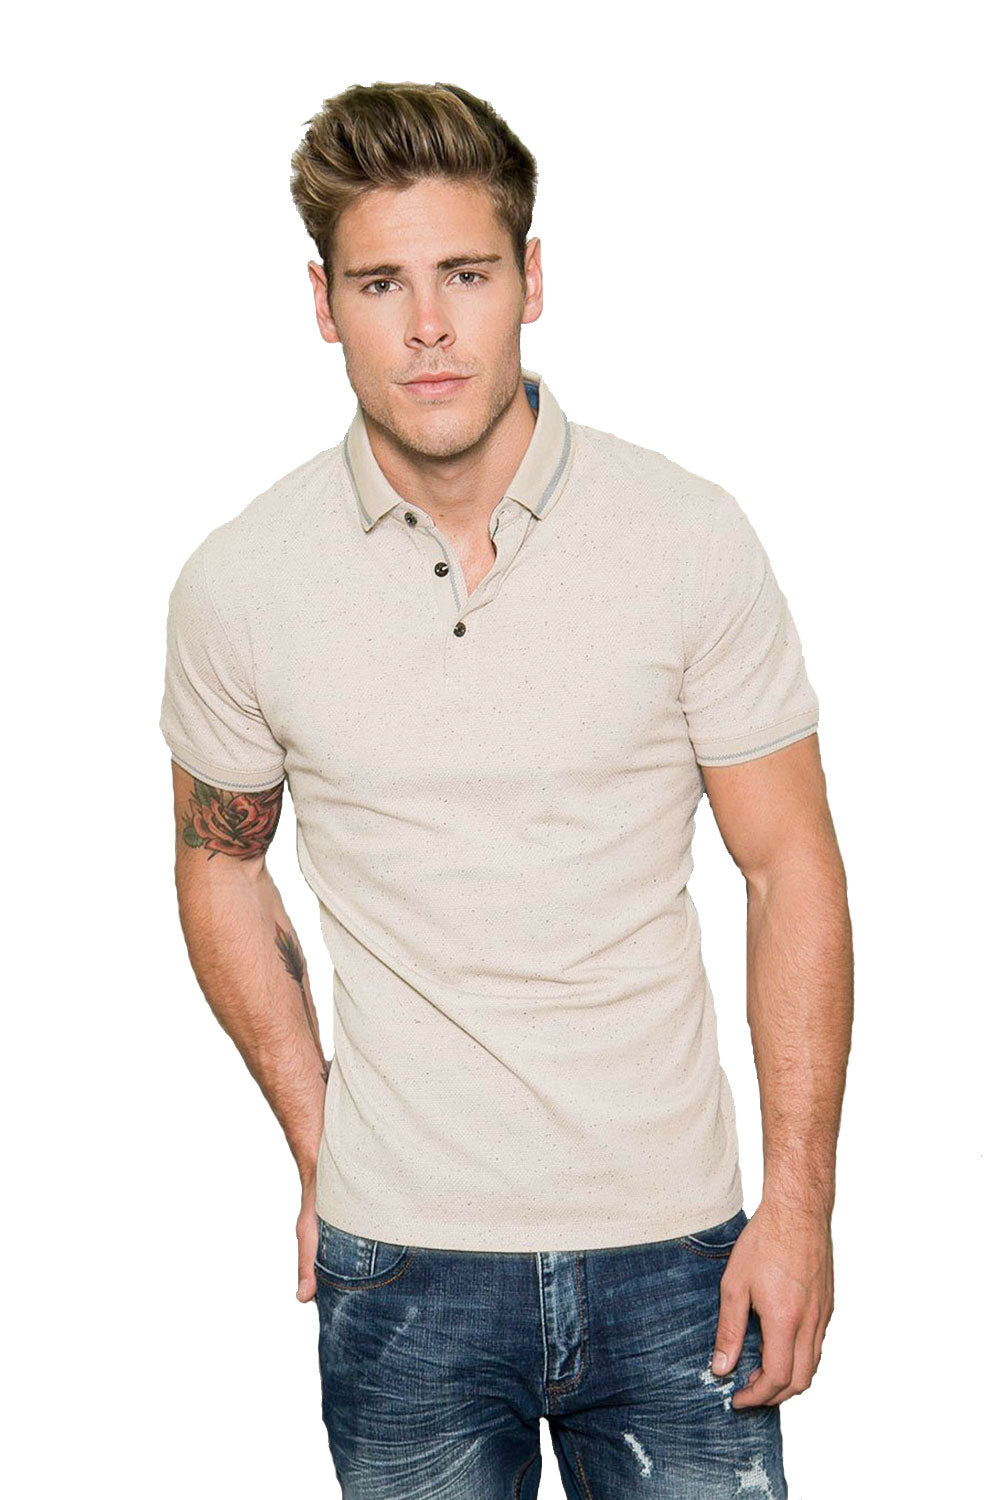 BARABAS Men's Basic Essential Solid Color Polo Shirts PP006